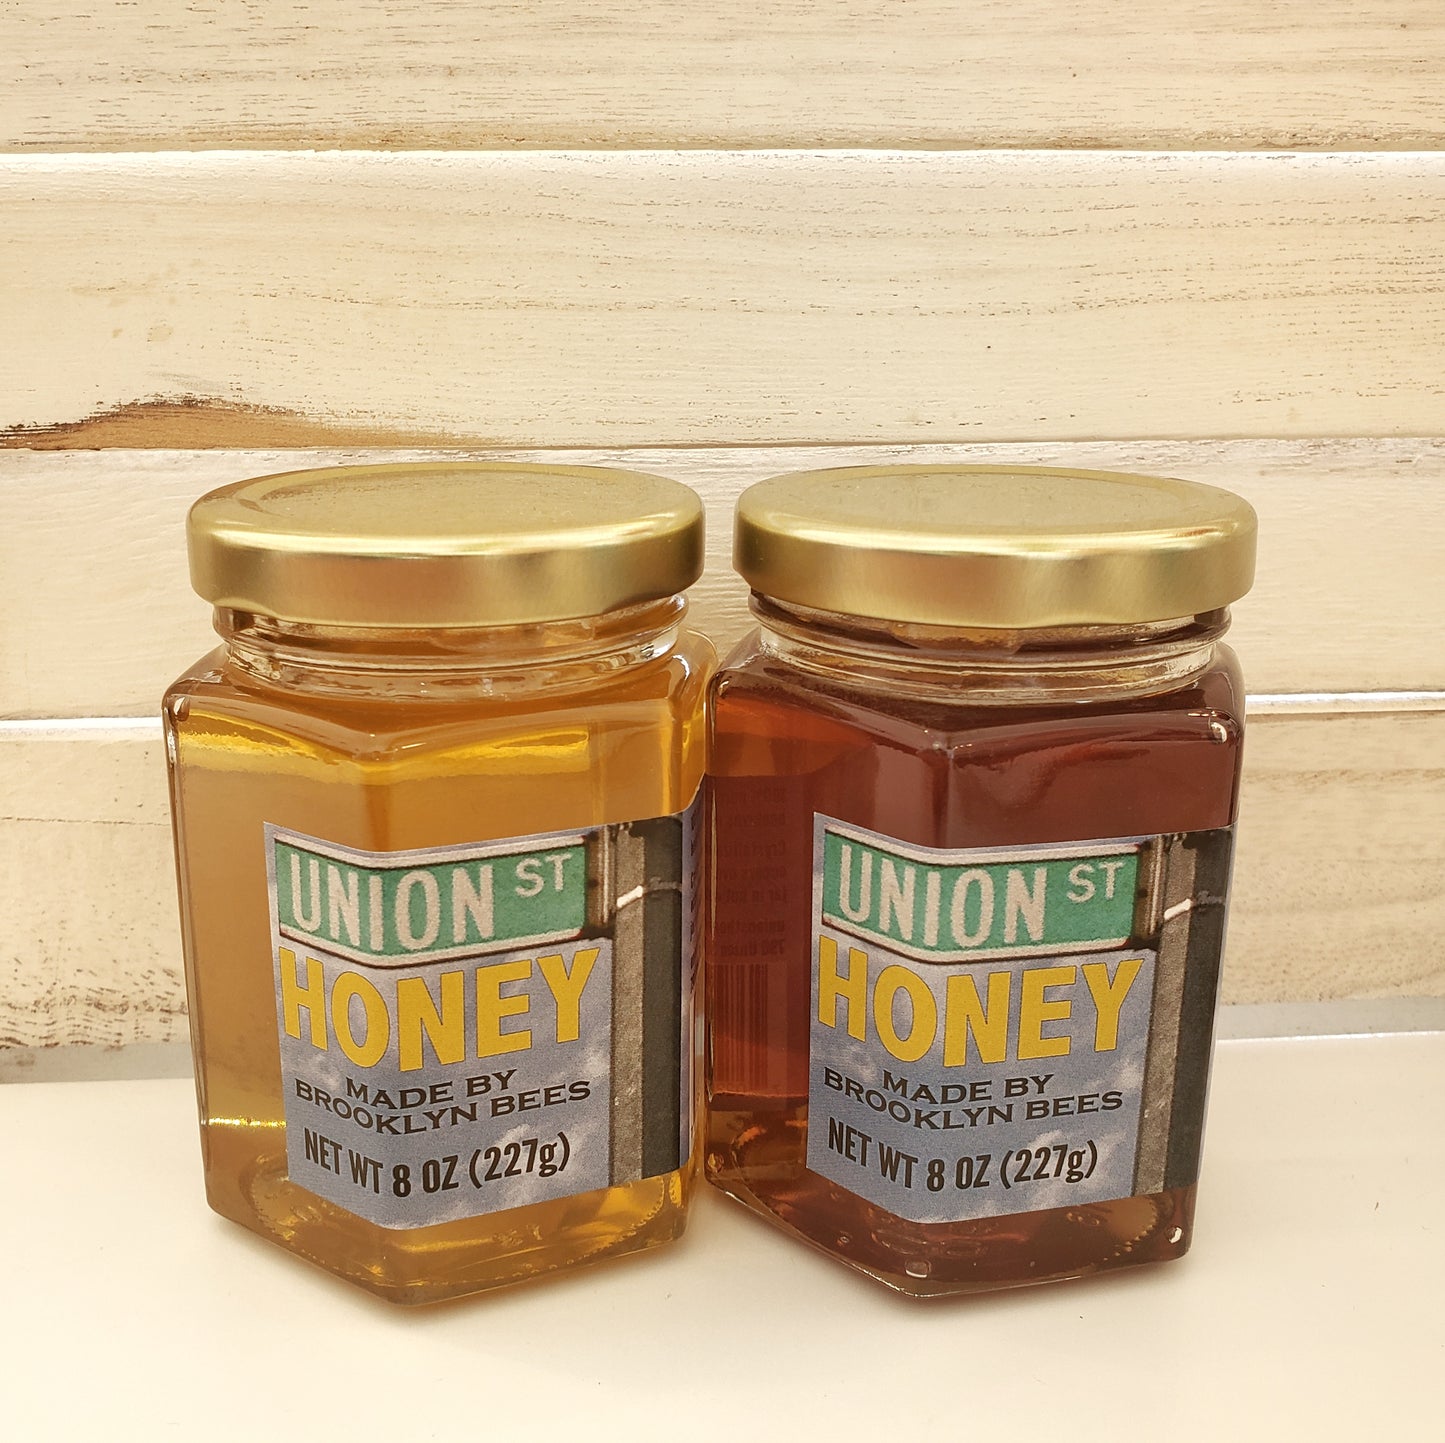 Union St Honey: Made by Brooklyn Bees